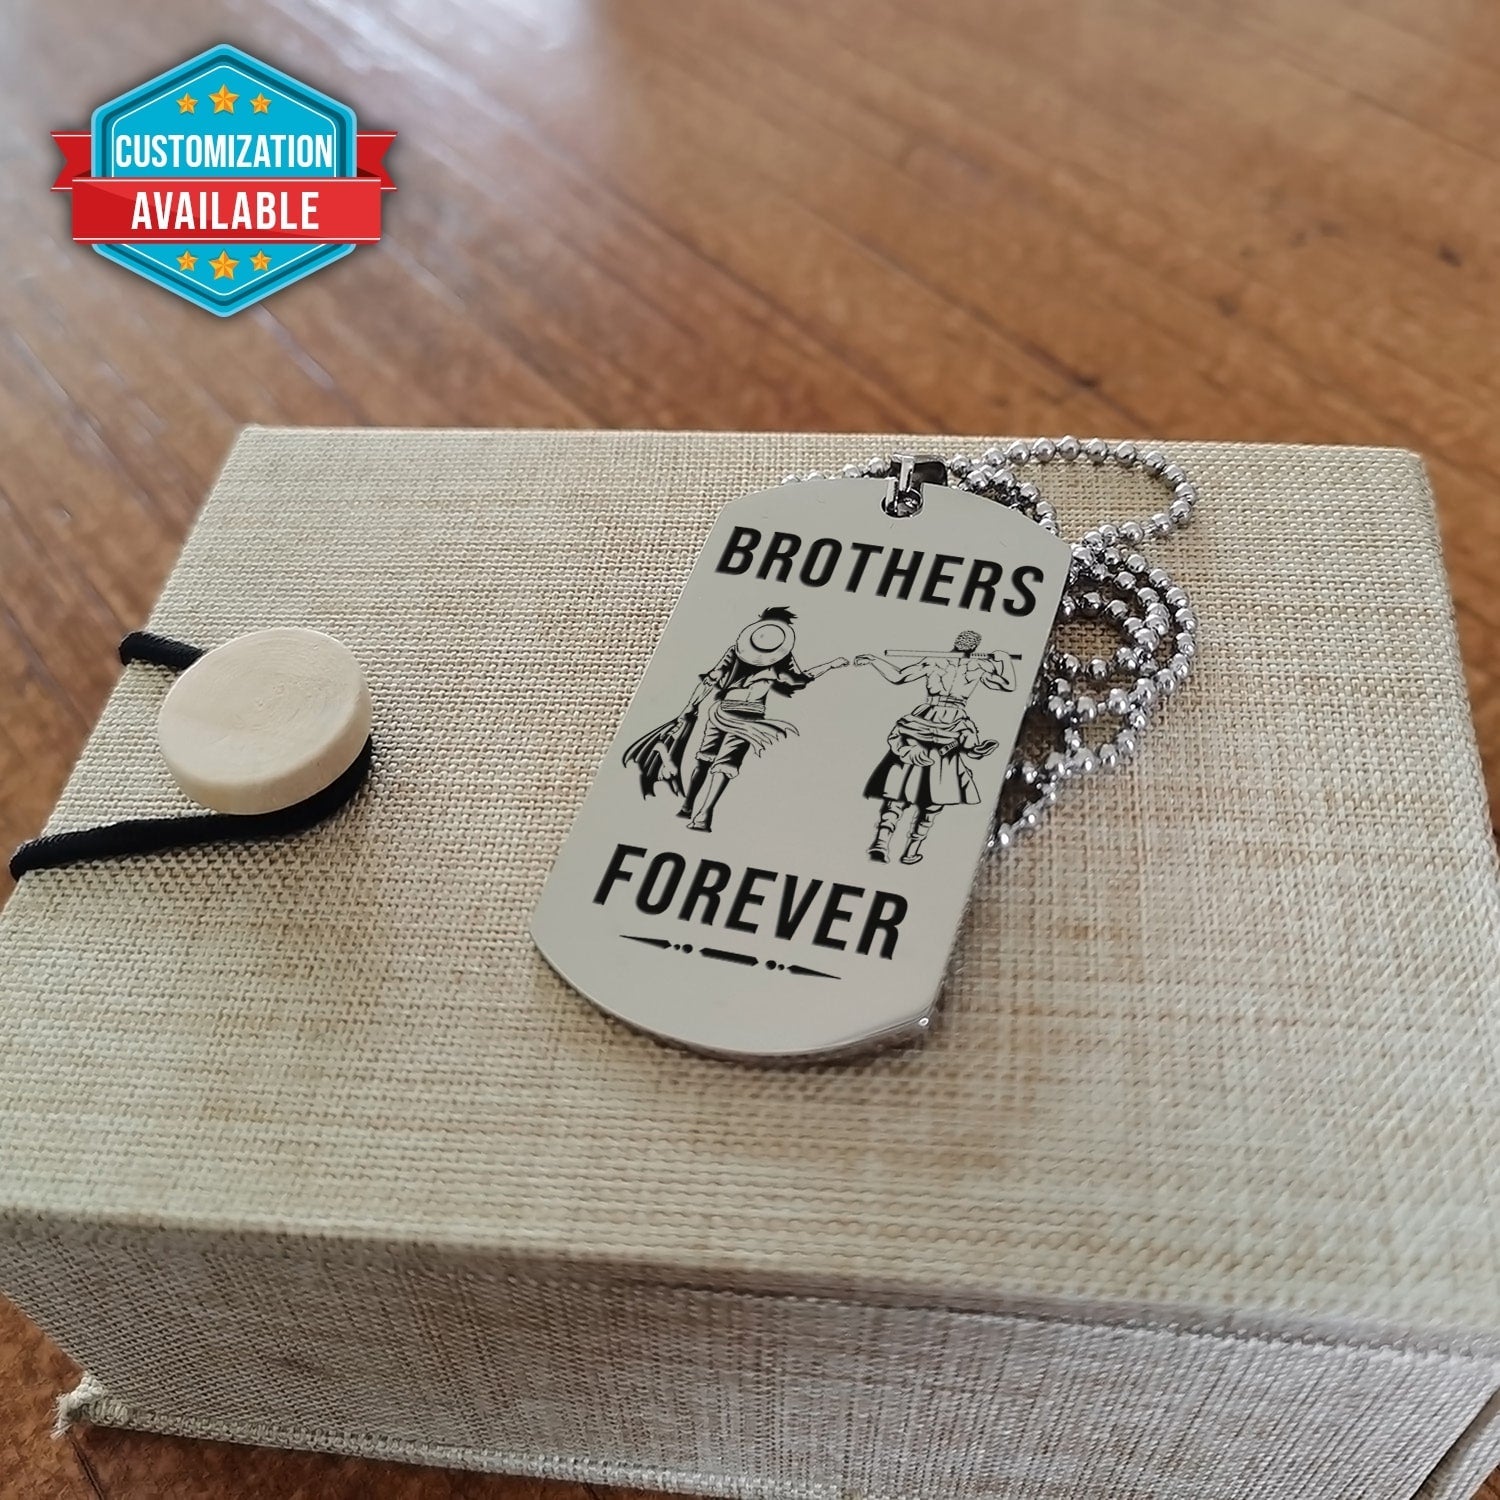 OPD034 - Brothers Forever - Call On Me Brother - Monkey D. Luffy - Roronoa Zoro - One Piece Dog Tag - Double Sided Engrave Silver Dog Tag